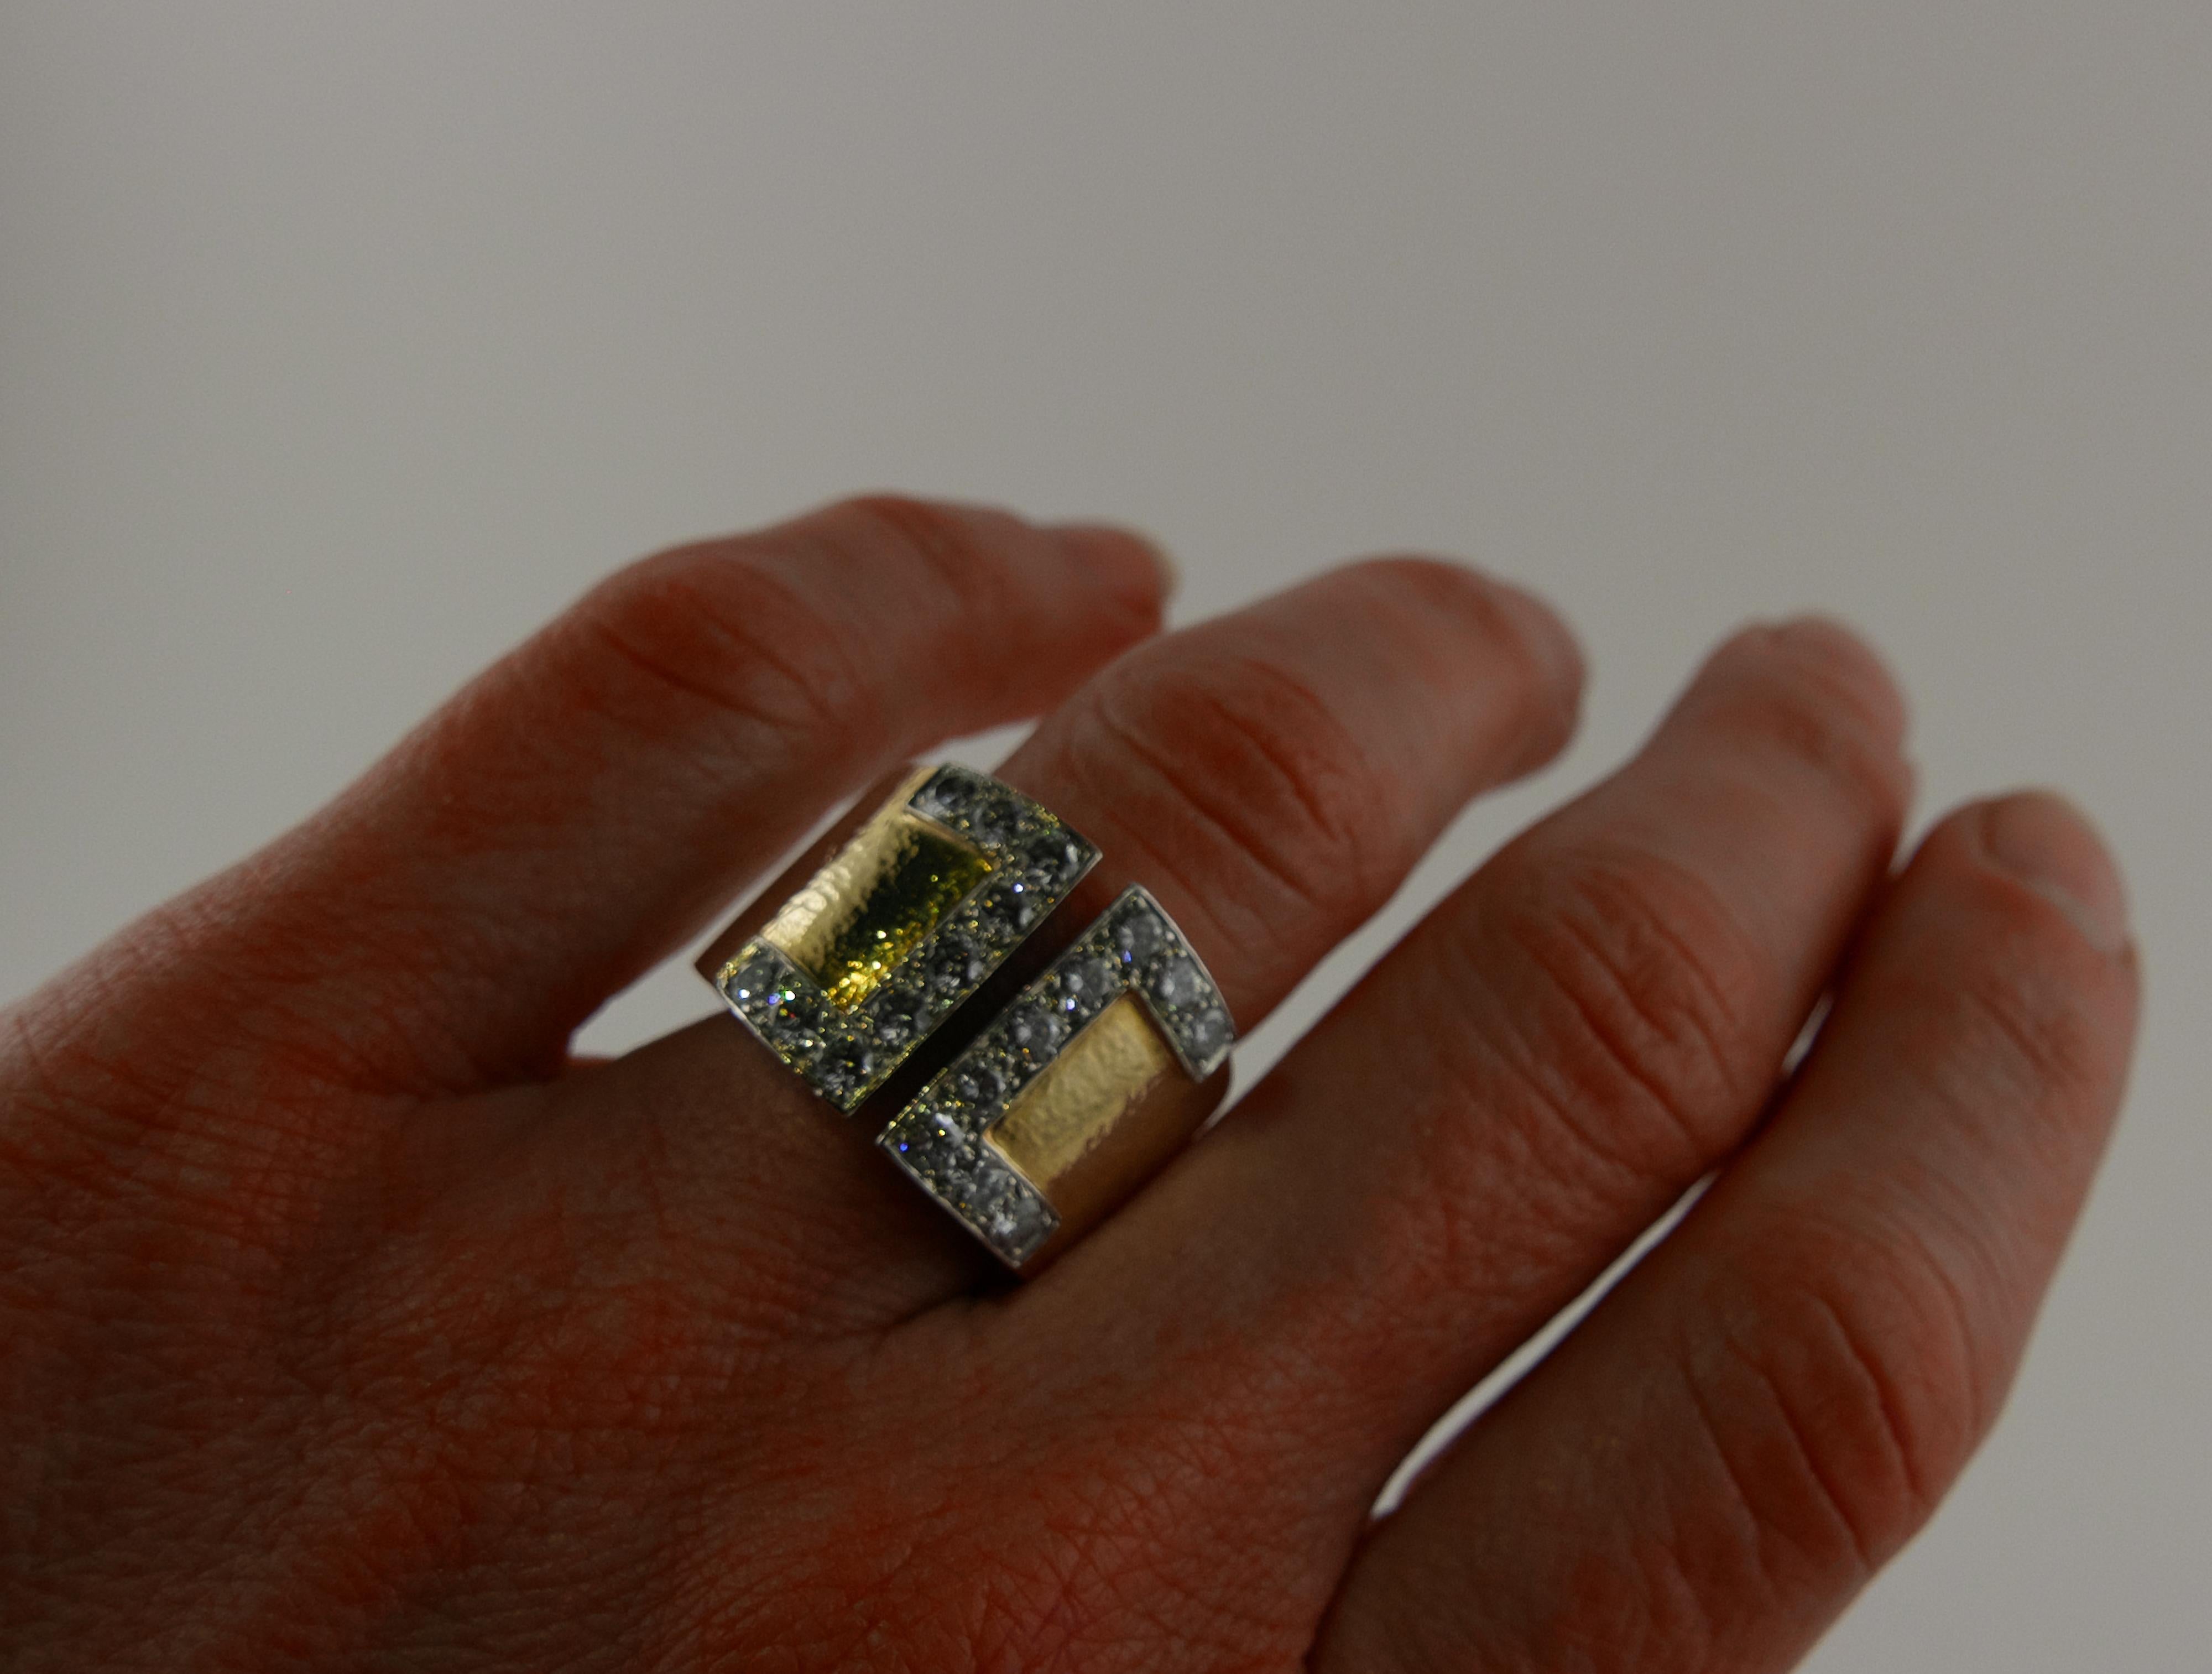 Extremely elegant 1970s David Webb geometric Ring finely crafted in rich 18 karat Yellow Gold and  brilliant cut Diamonds set in Platinum.
This stylish and always modern open band Ring is in polished hammered Yellow Gold edged and enlighted with an